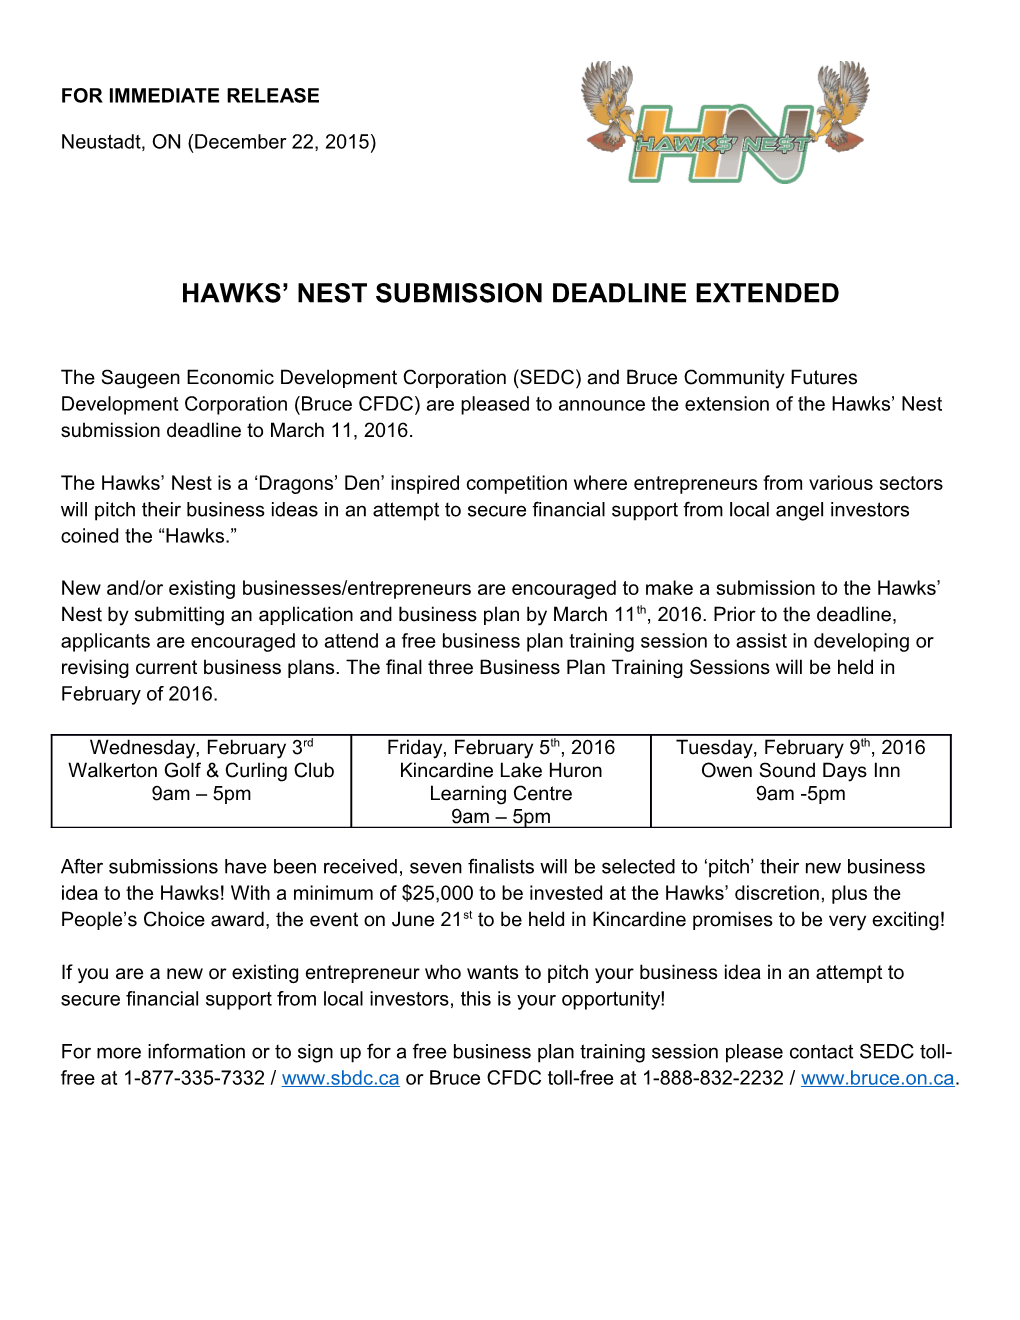 Hawks Nest Submission Deadline Extended